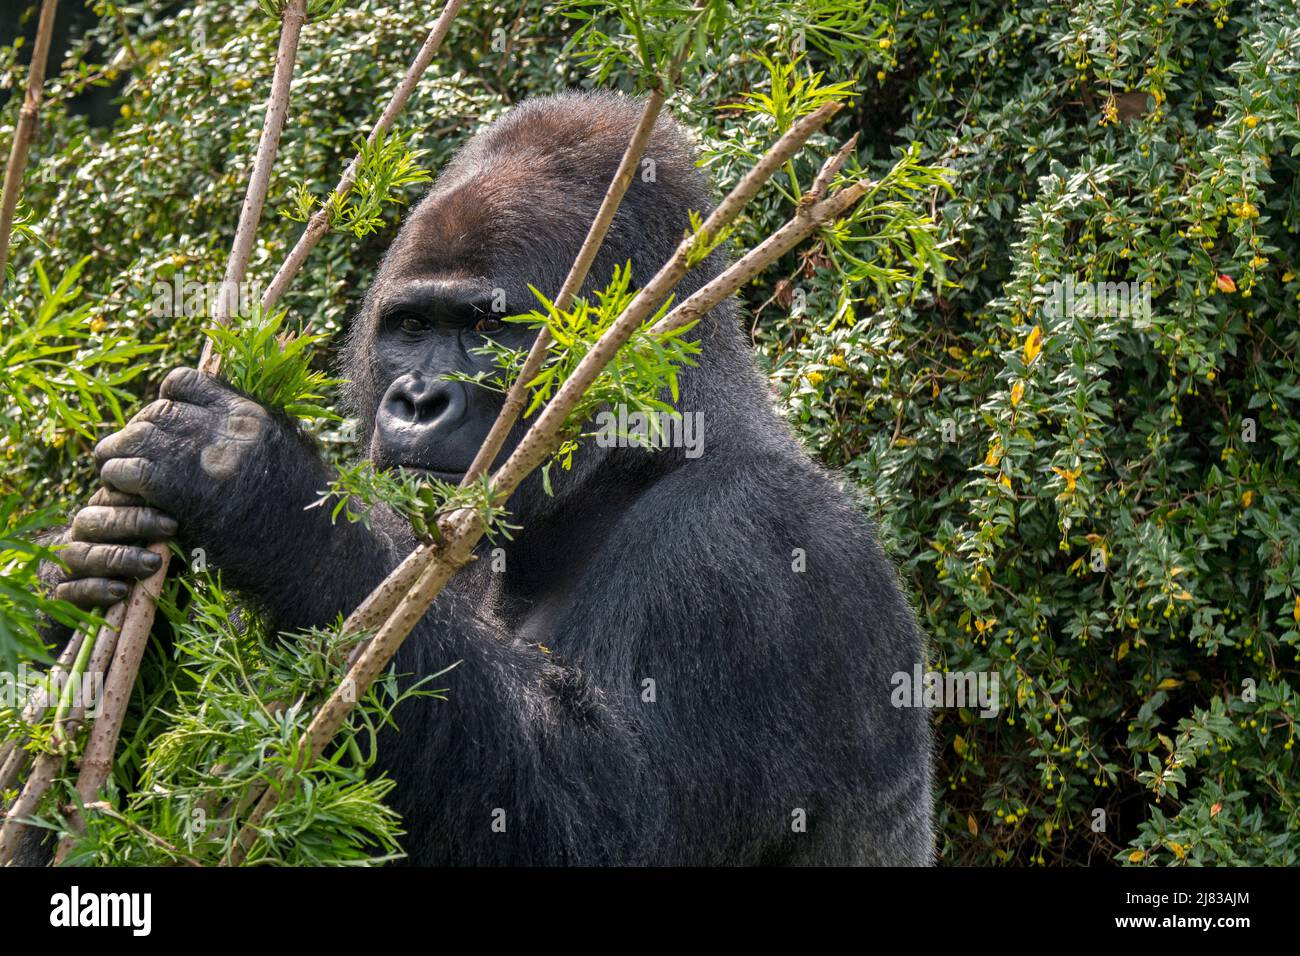 Western lowland gorilla (Gorilla gorilla gorilla) male silverback in forest Stock Photo